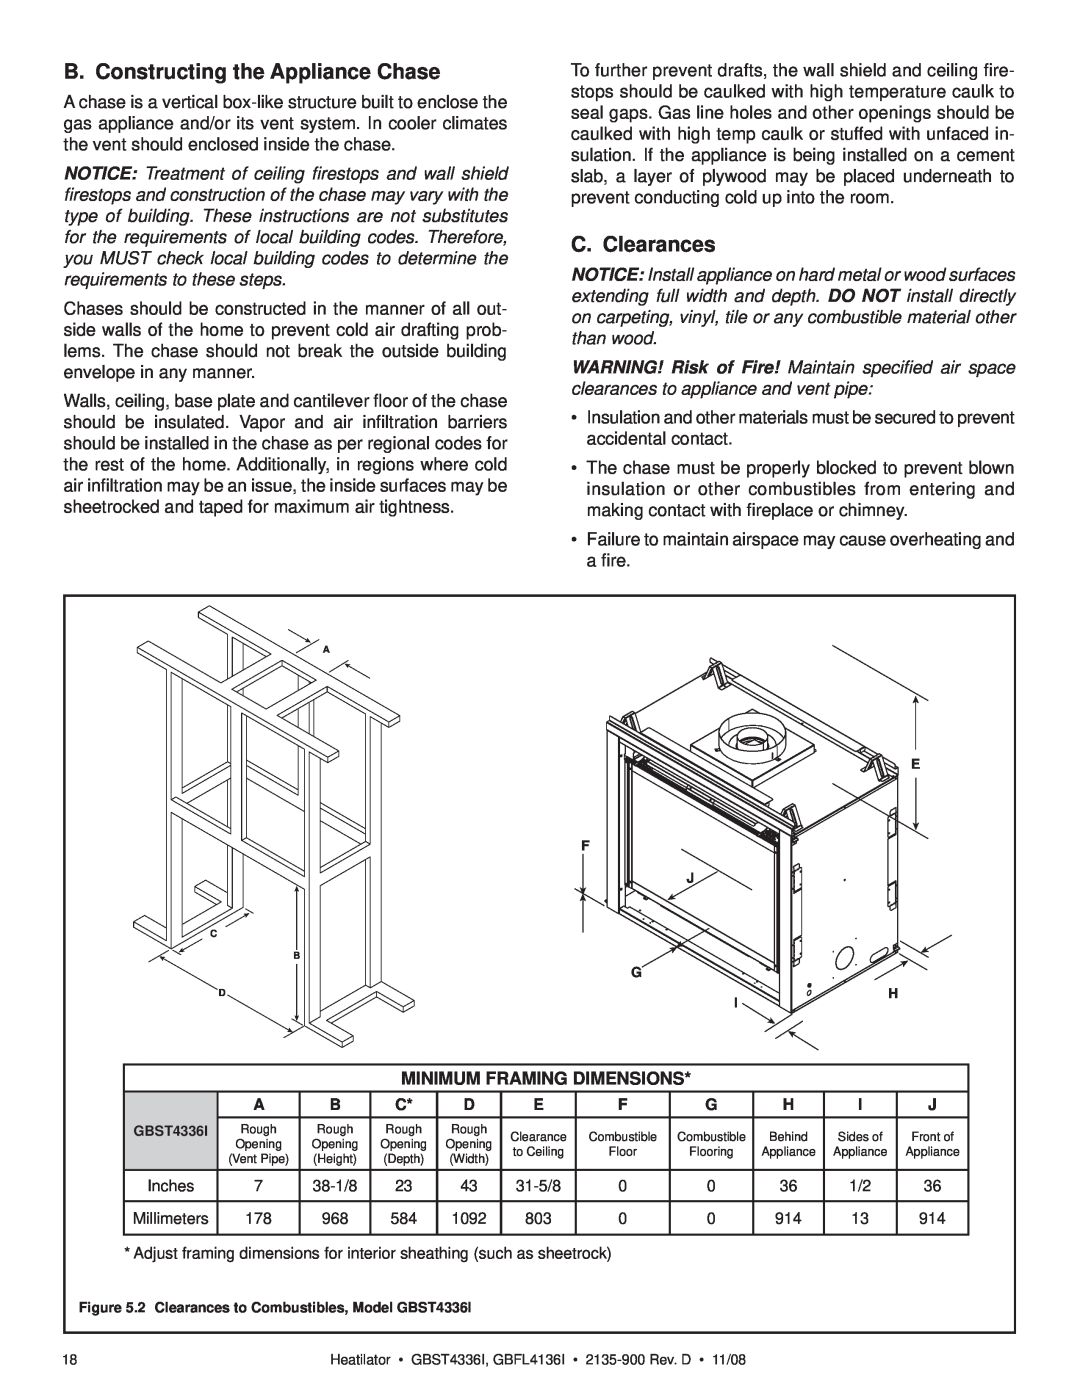 Hearth and Home Technologies GBFL4136I B. Constructing the Appliance Chase, C. Clearances, Minimum Framing Dimensions 